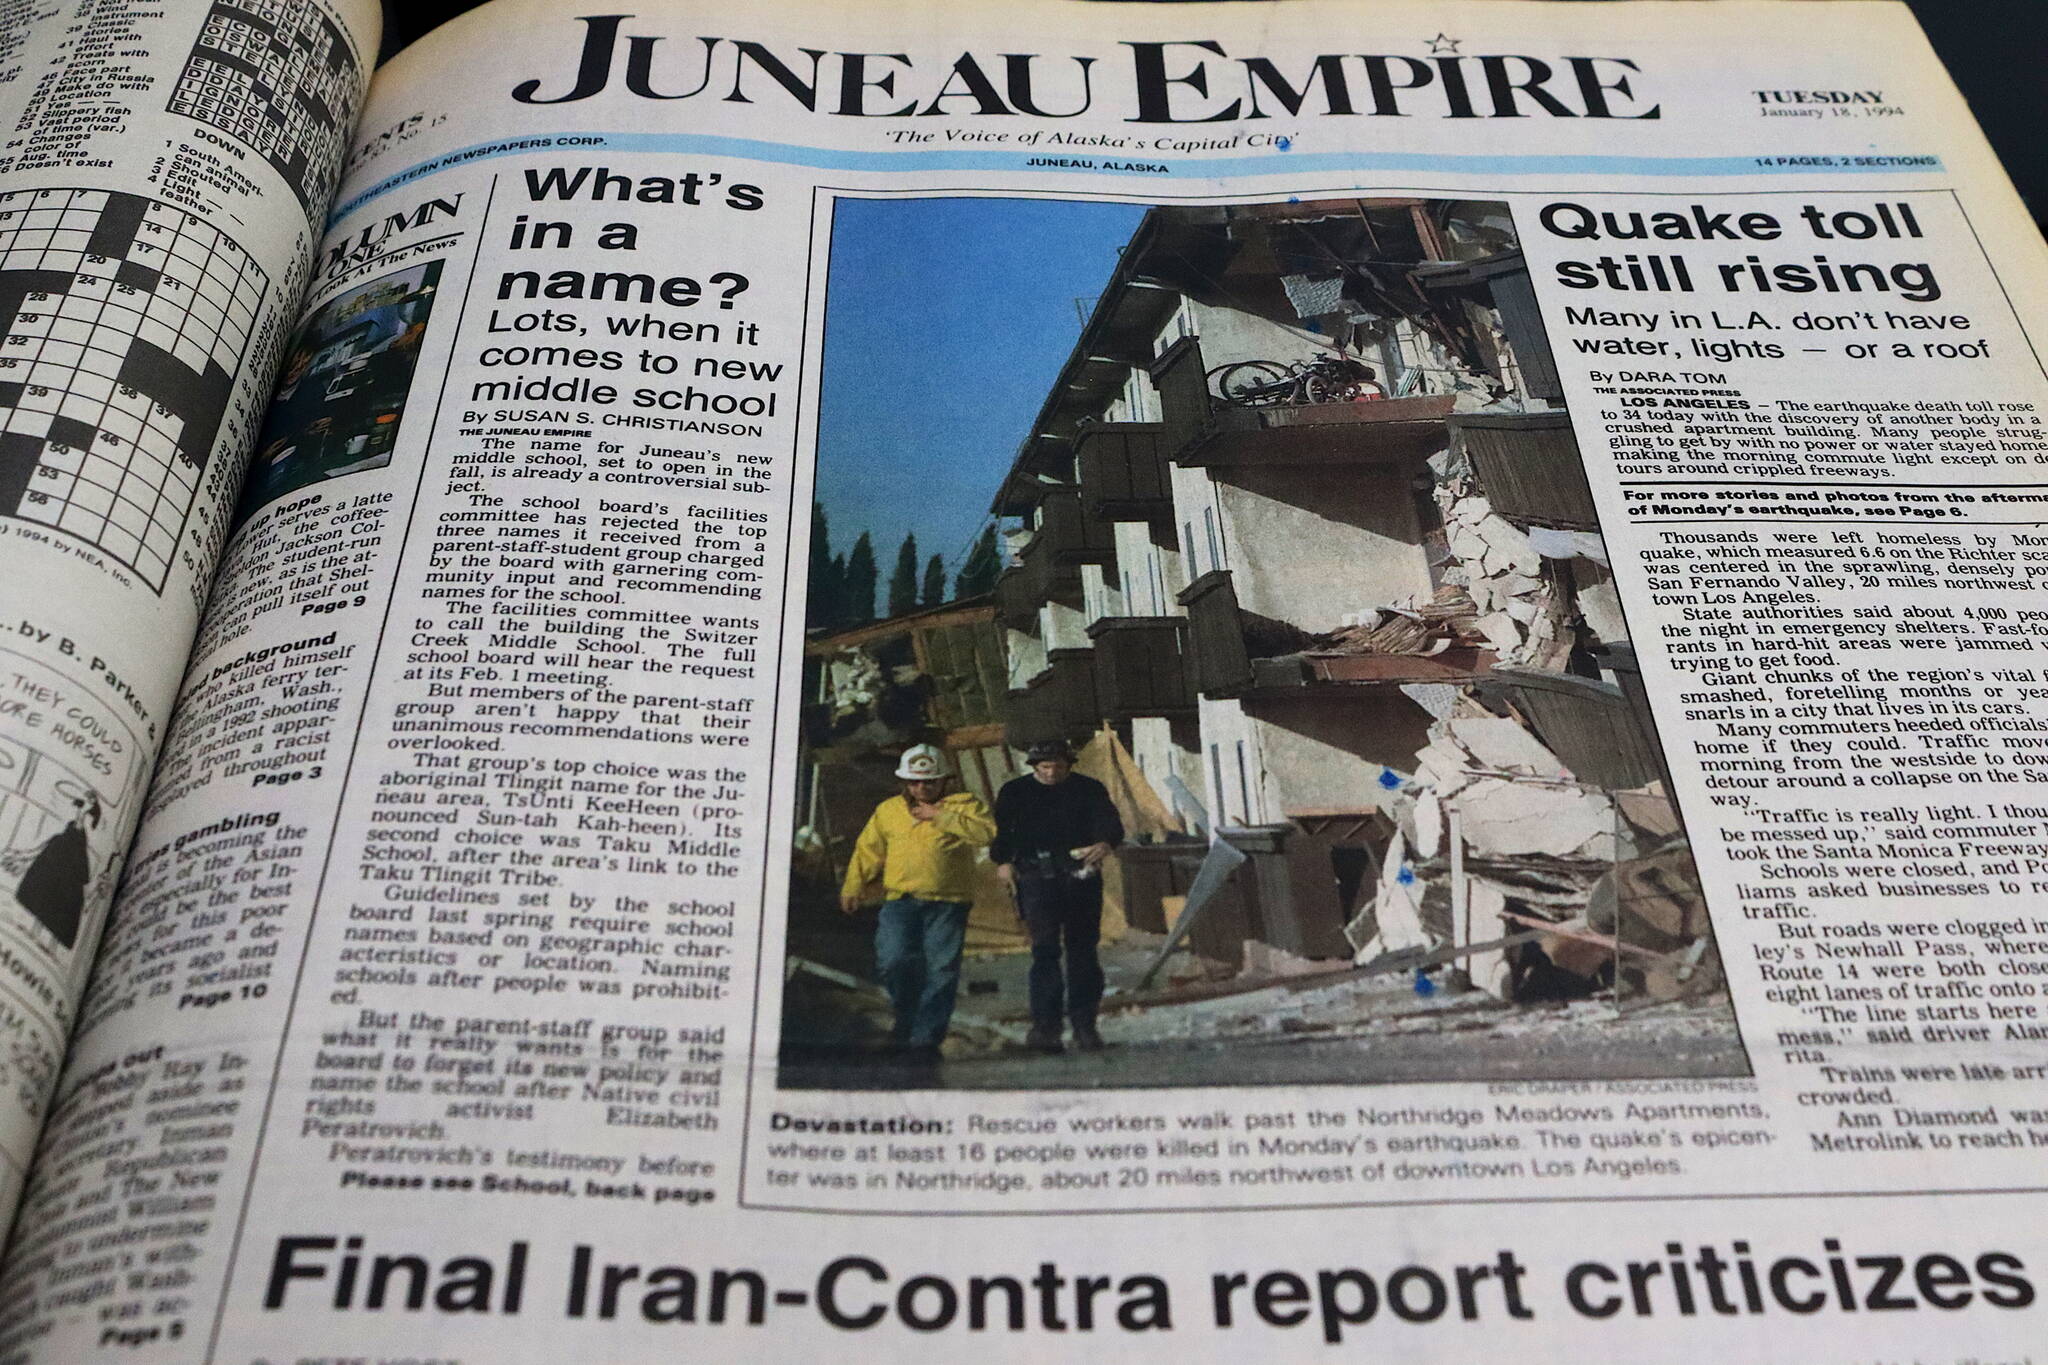 The front page of the Juneau Empire on Jan. 18, 1994. (Mark Sabbatini / Juneau Empire)